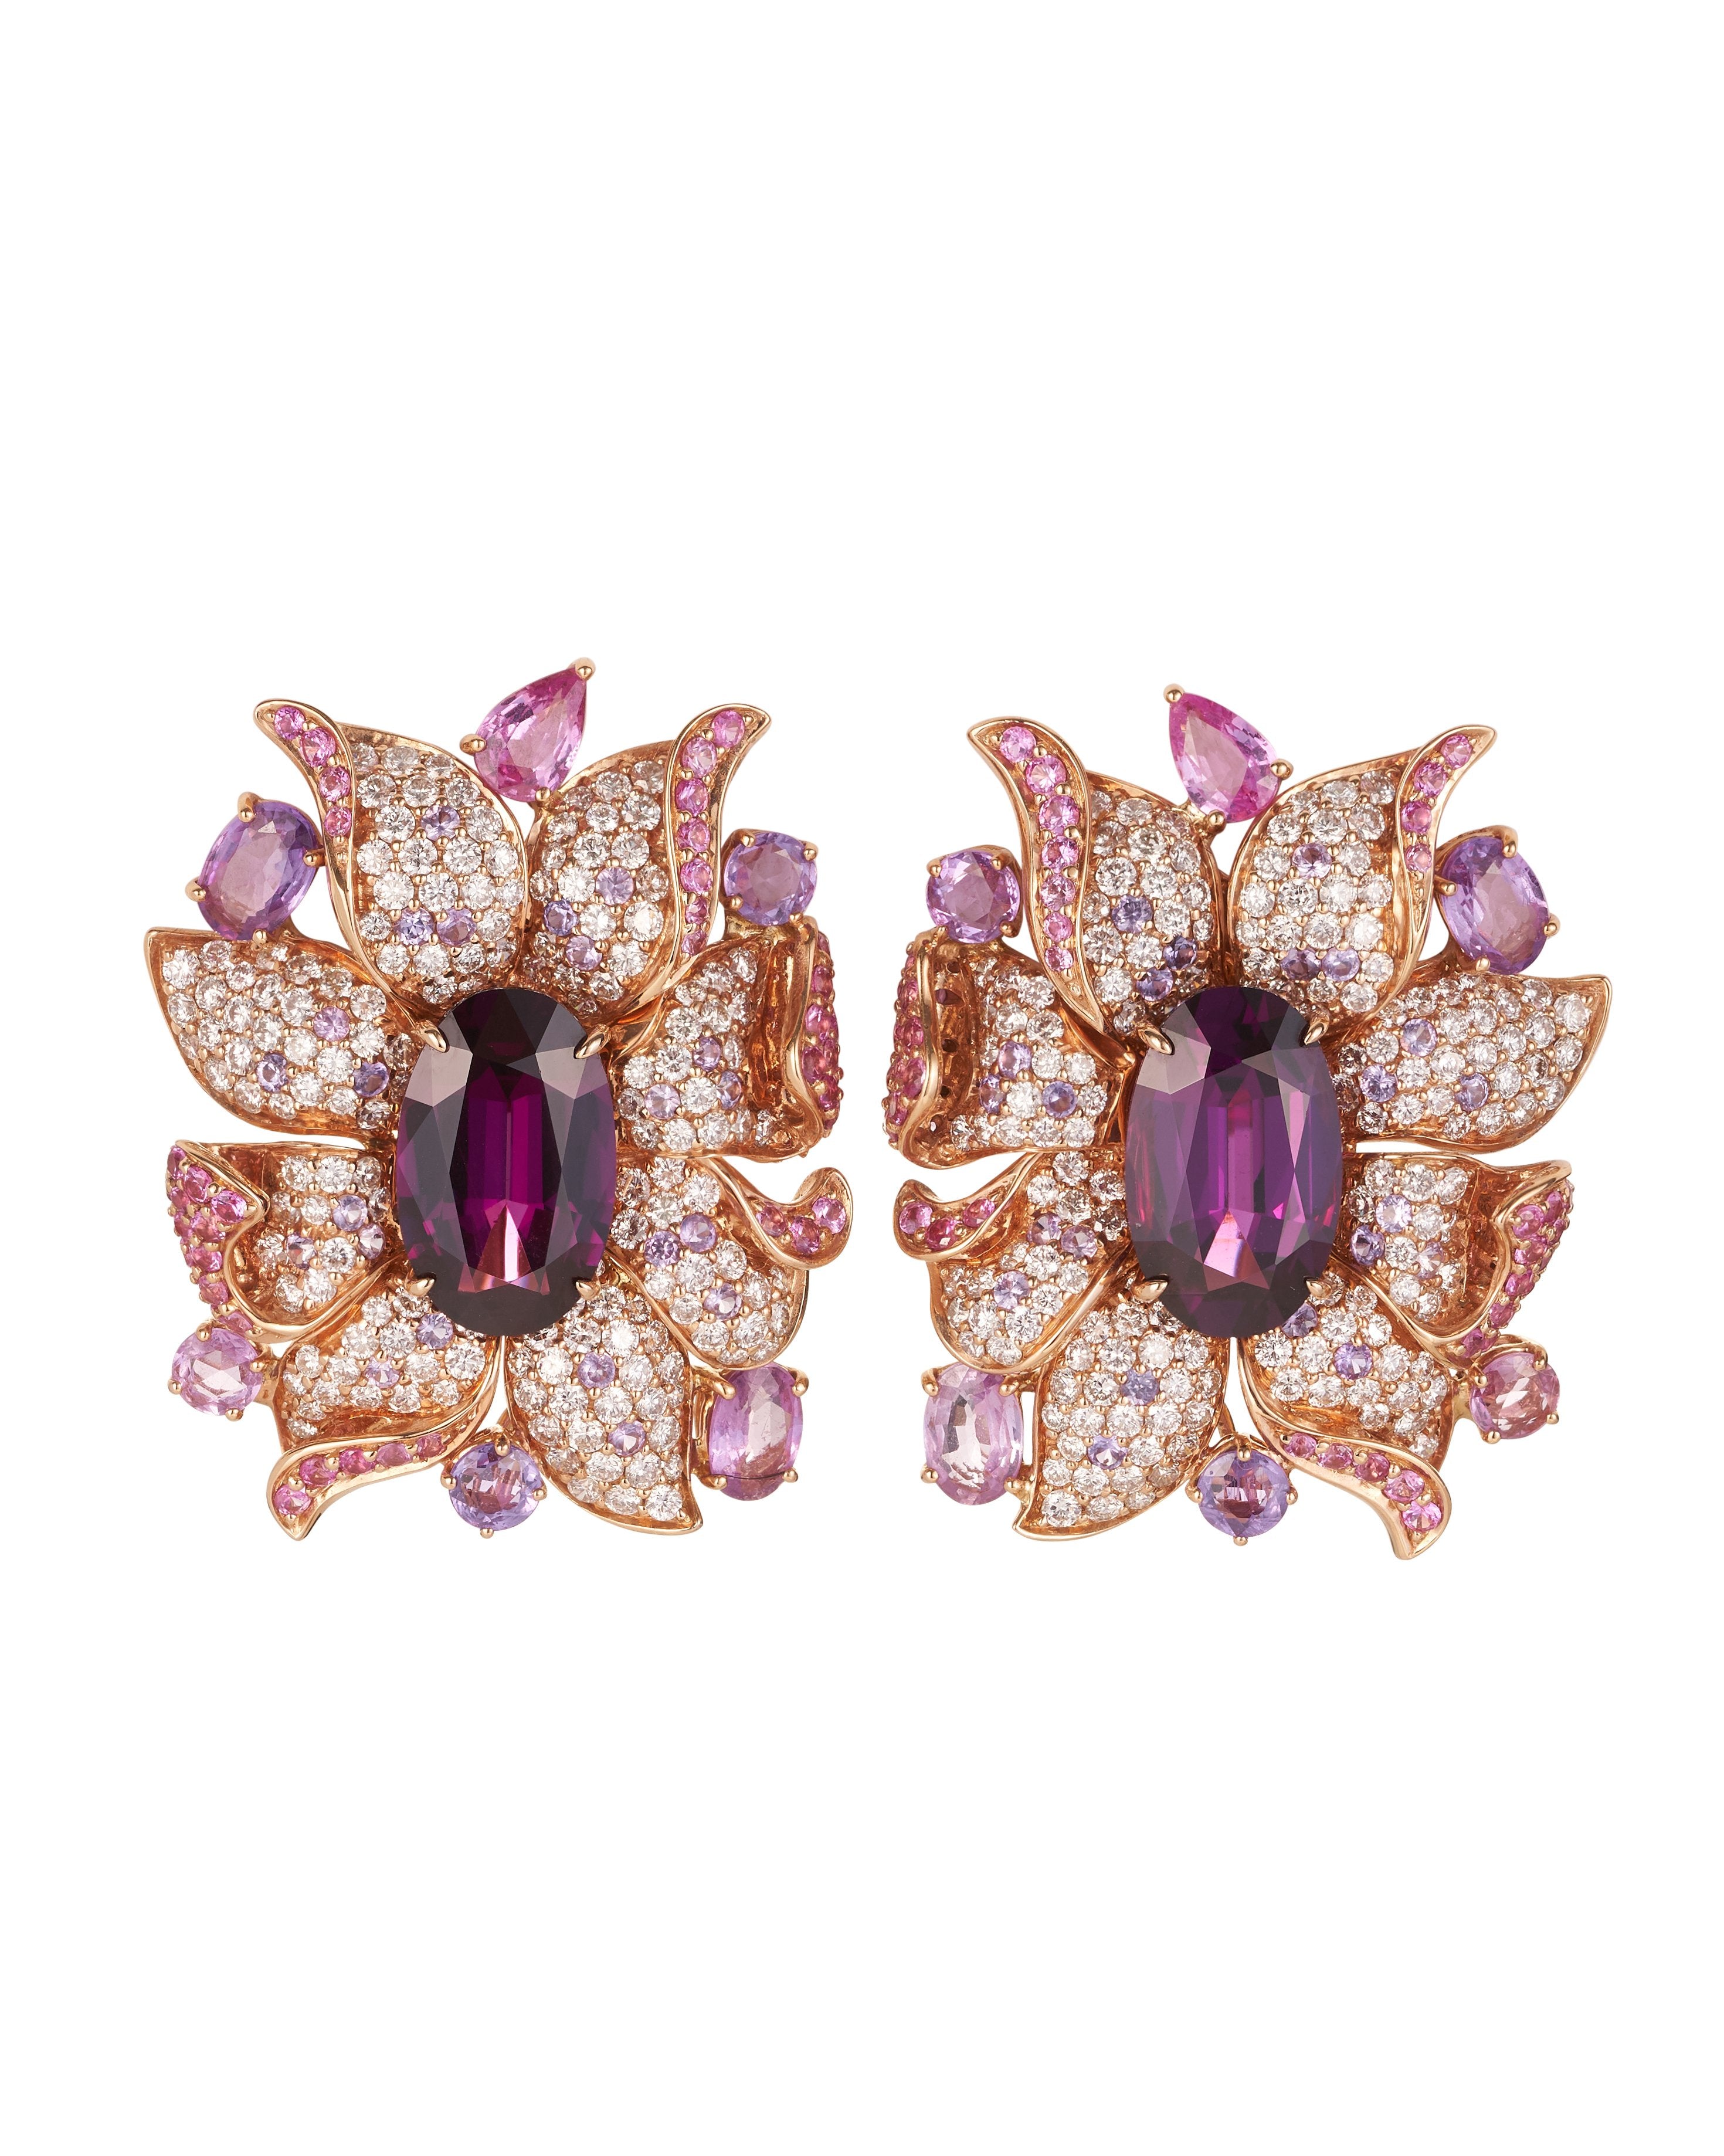 "Viva" umbalite garnet flowers surrounded by diamonds, pink and purple sapphires, crafted in 18 karat rose gold.